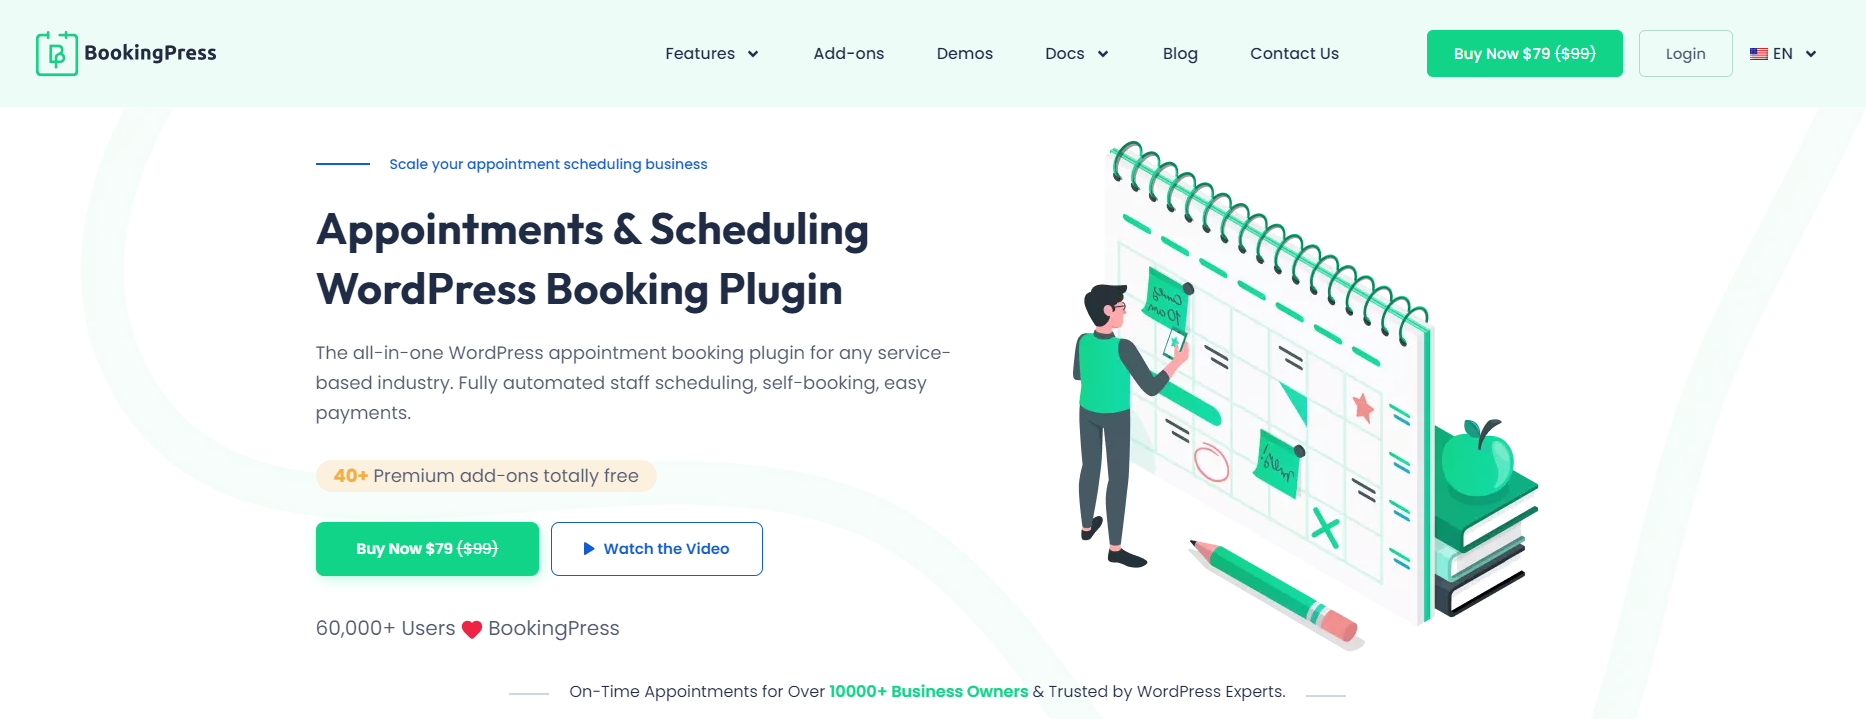 Appointments & Scheduling WordPress Booking Plugin